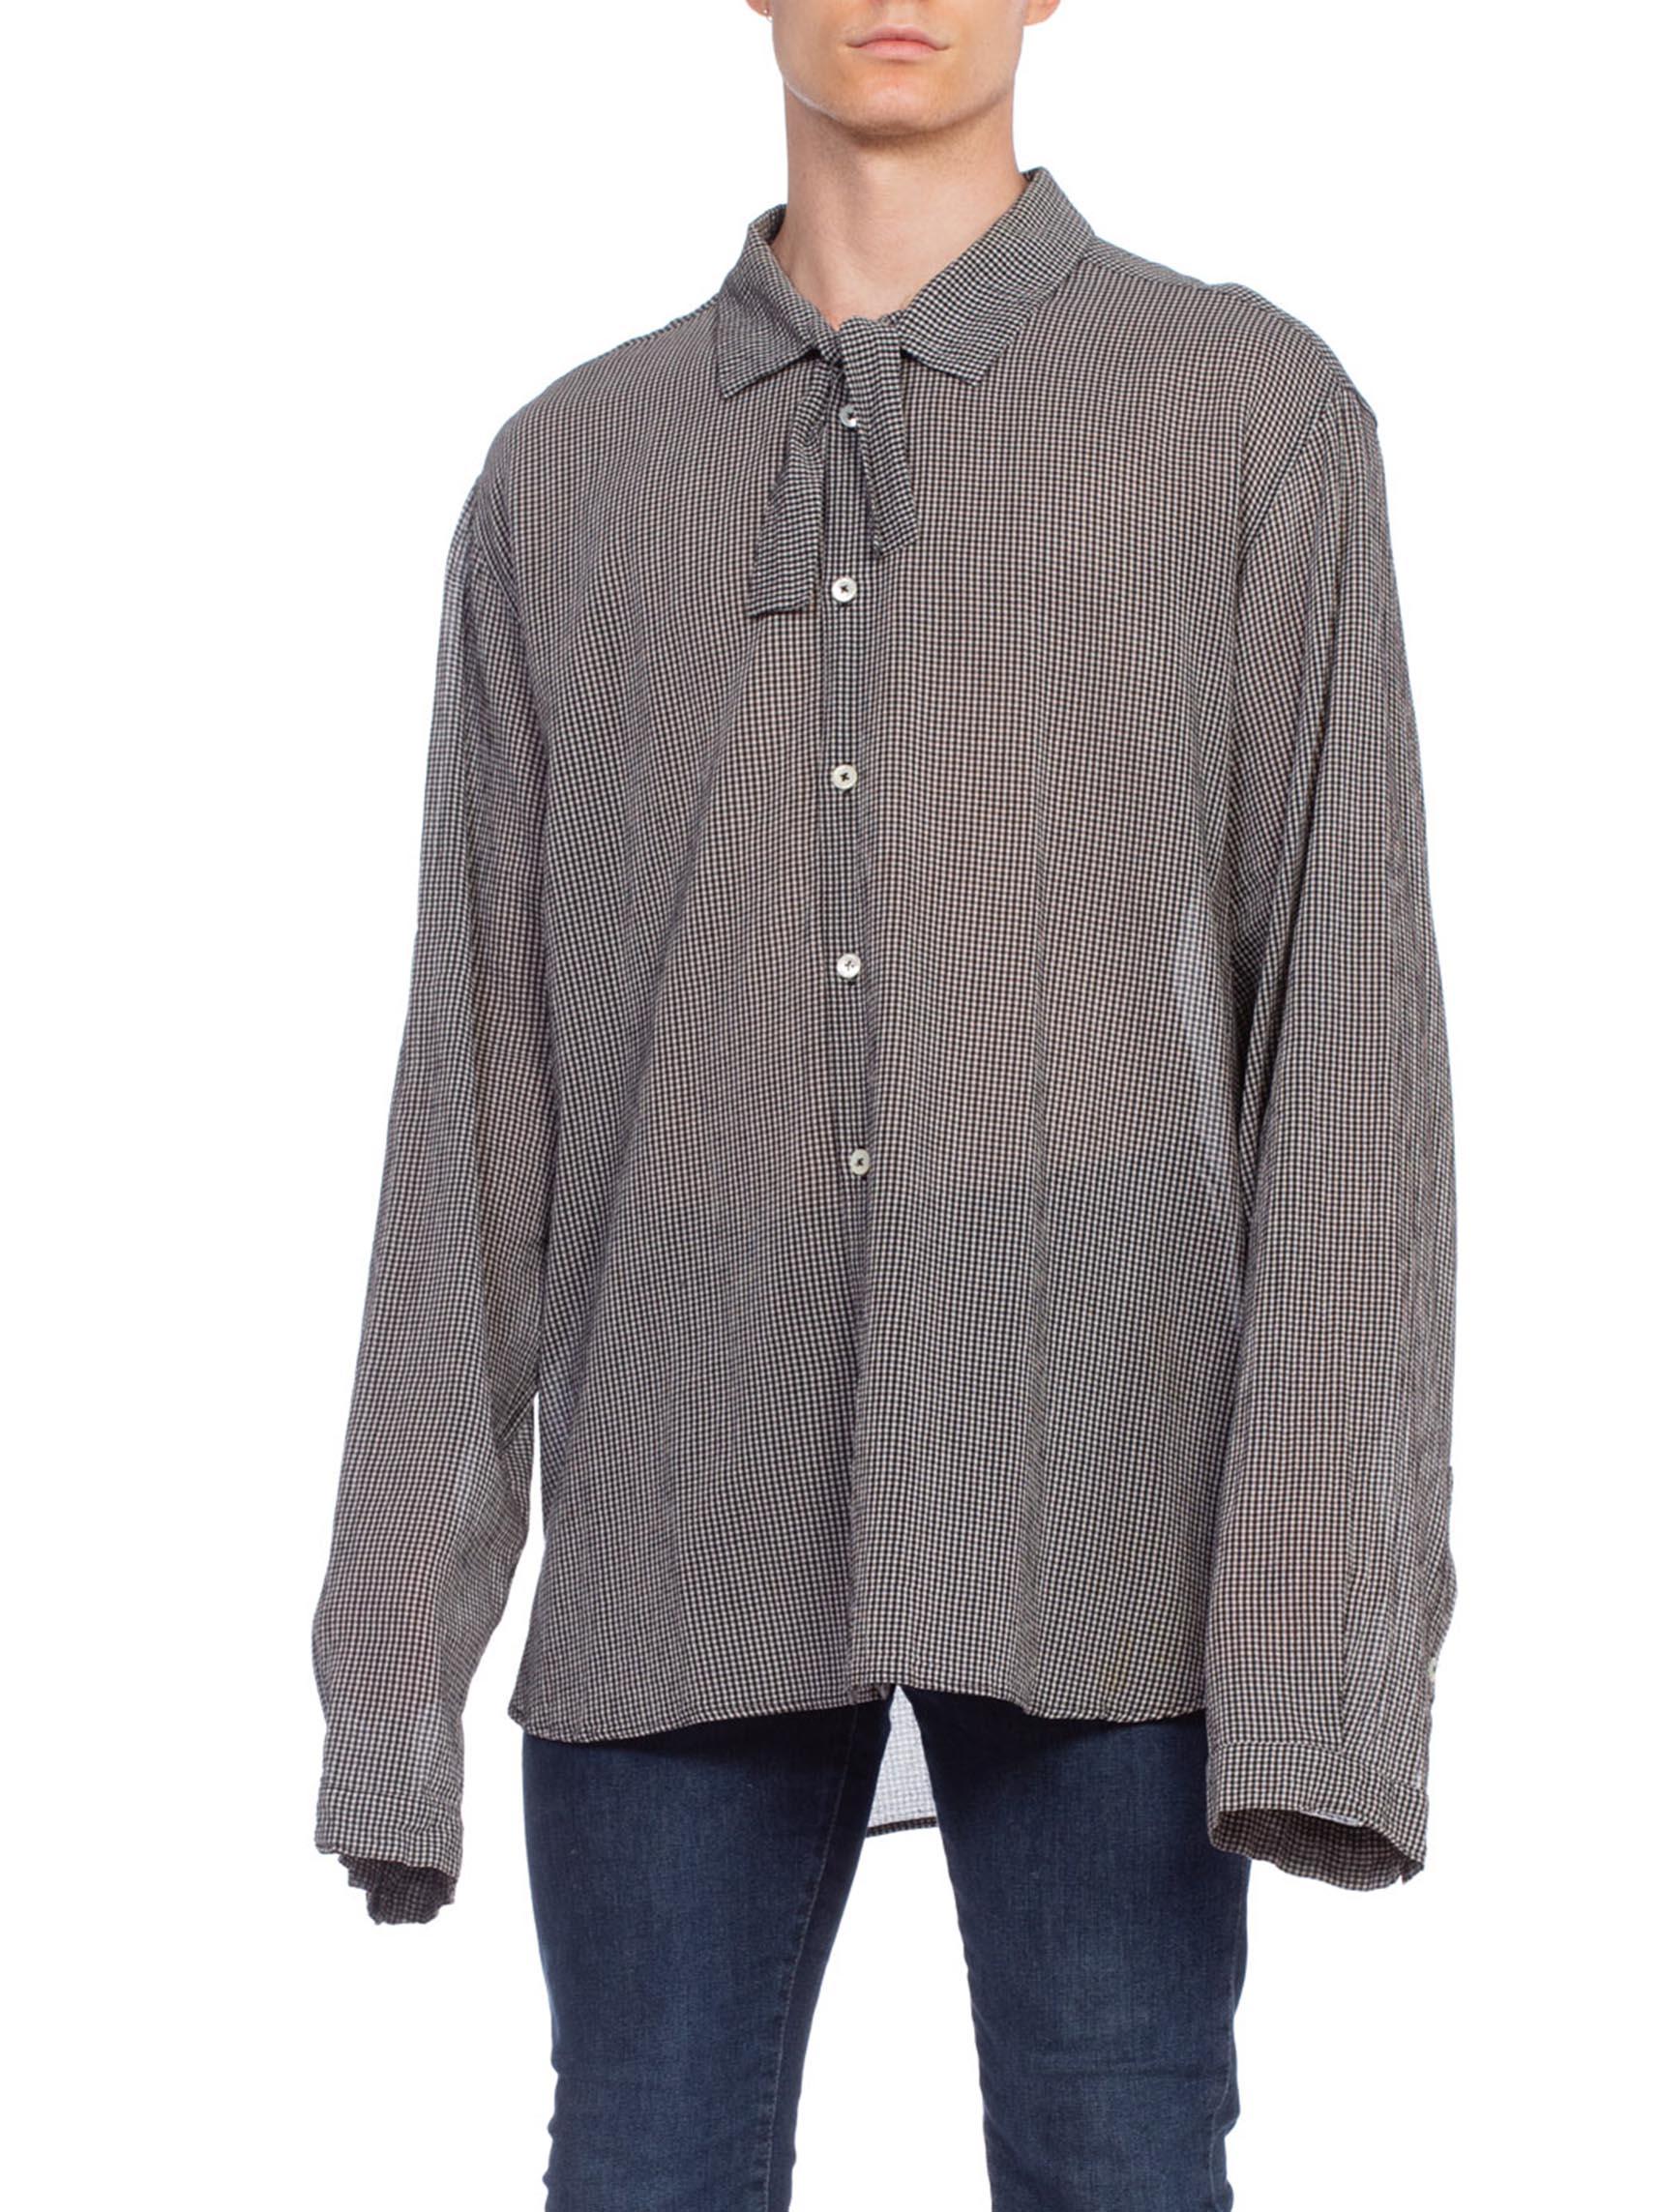 2000S ANN DEMEULEMEESTER Rayon Crepe Men's Oversized Bow Neck Shirt For Sale 2